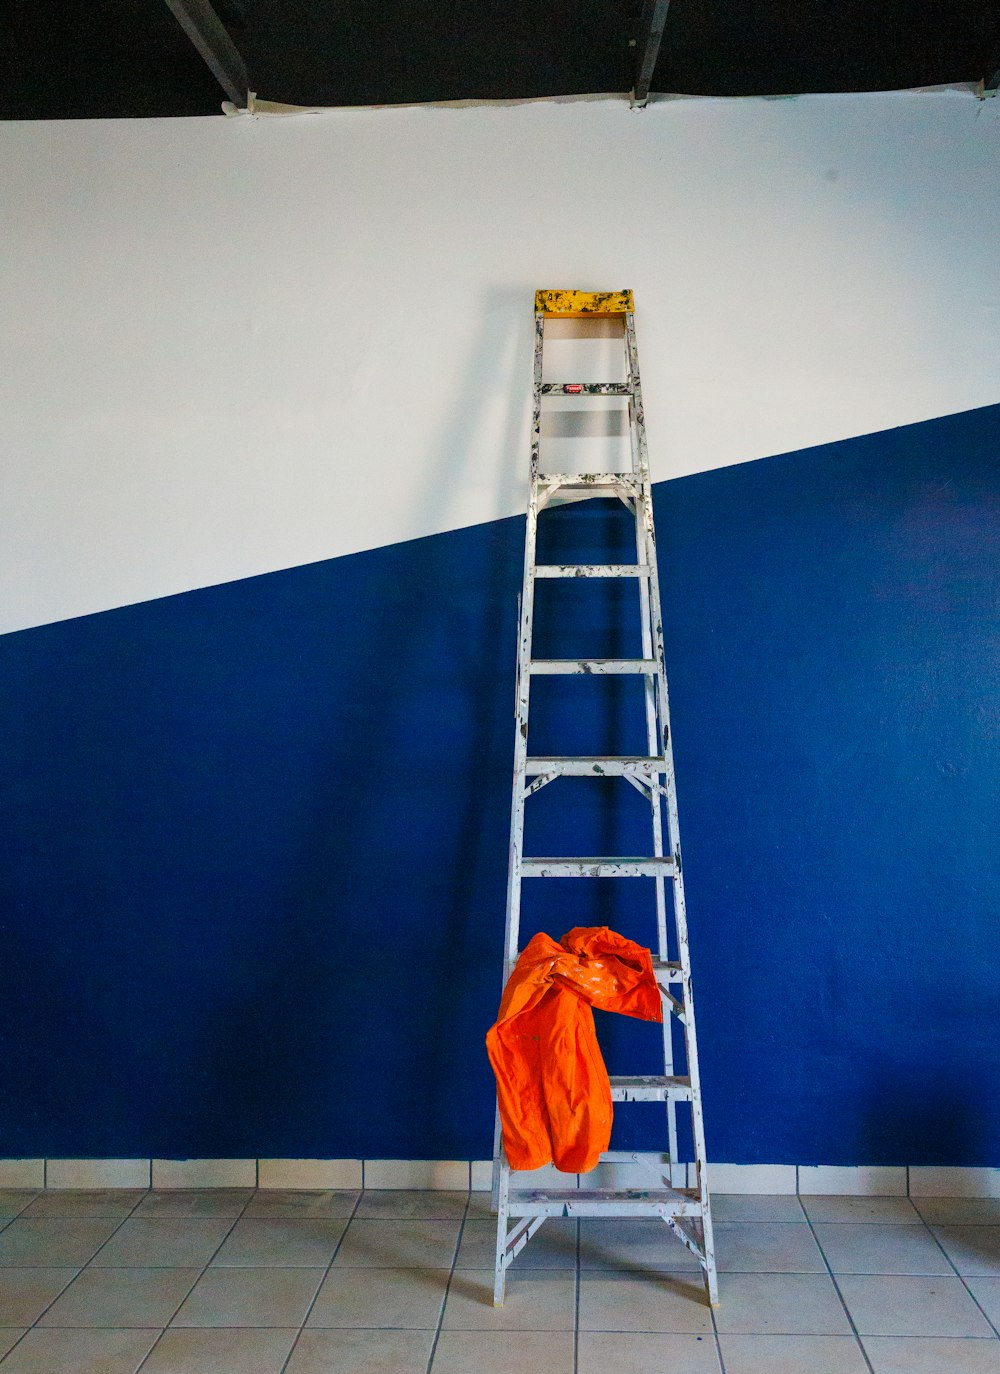 a ladder leaning against a blue and white wall